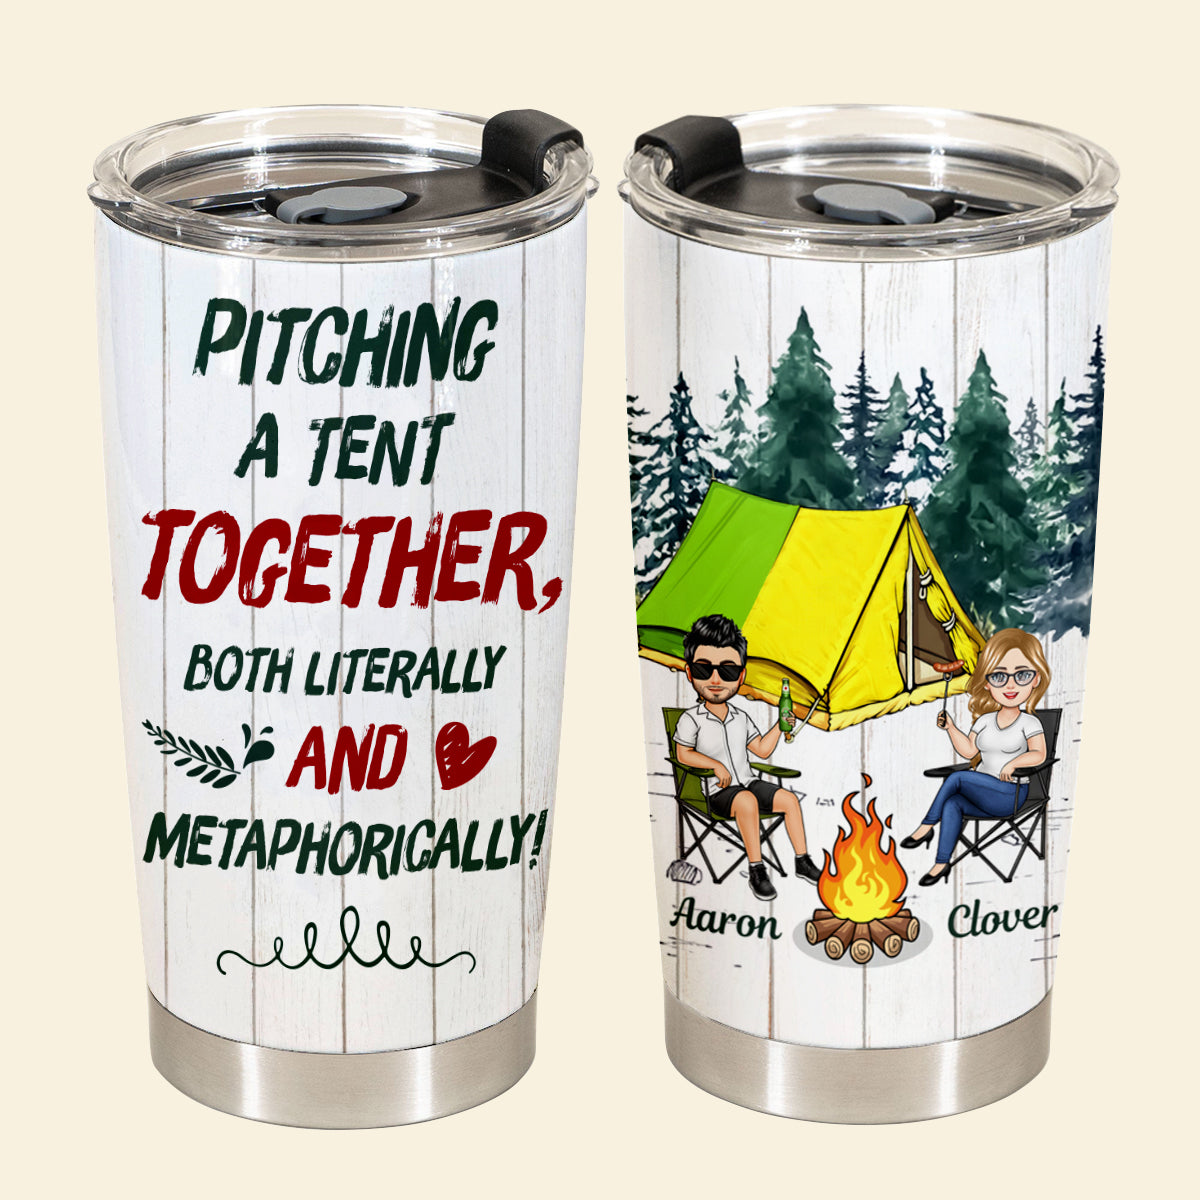 Pitching A Tent Together - Personalized Tumbler - Gift For Couple, Camping, Summer Vacation